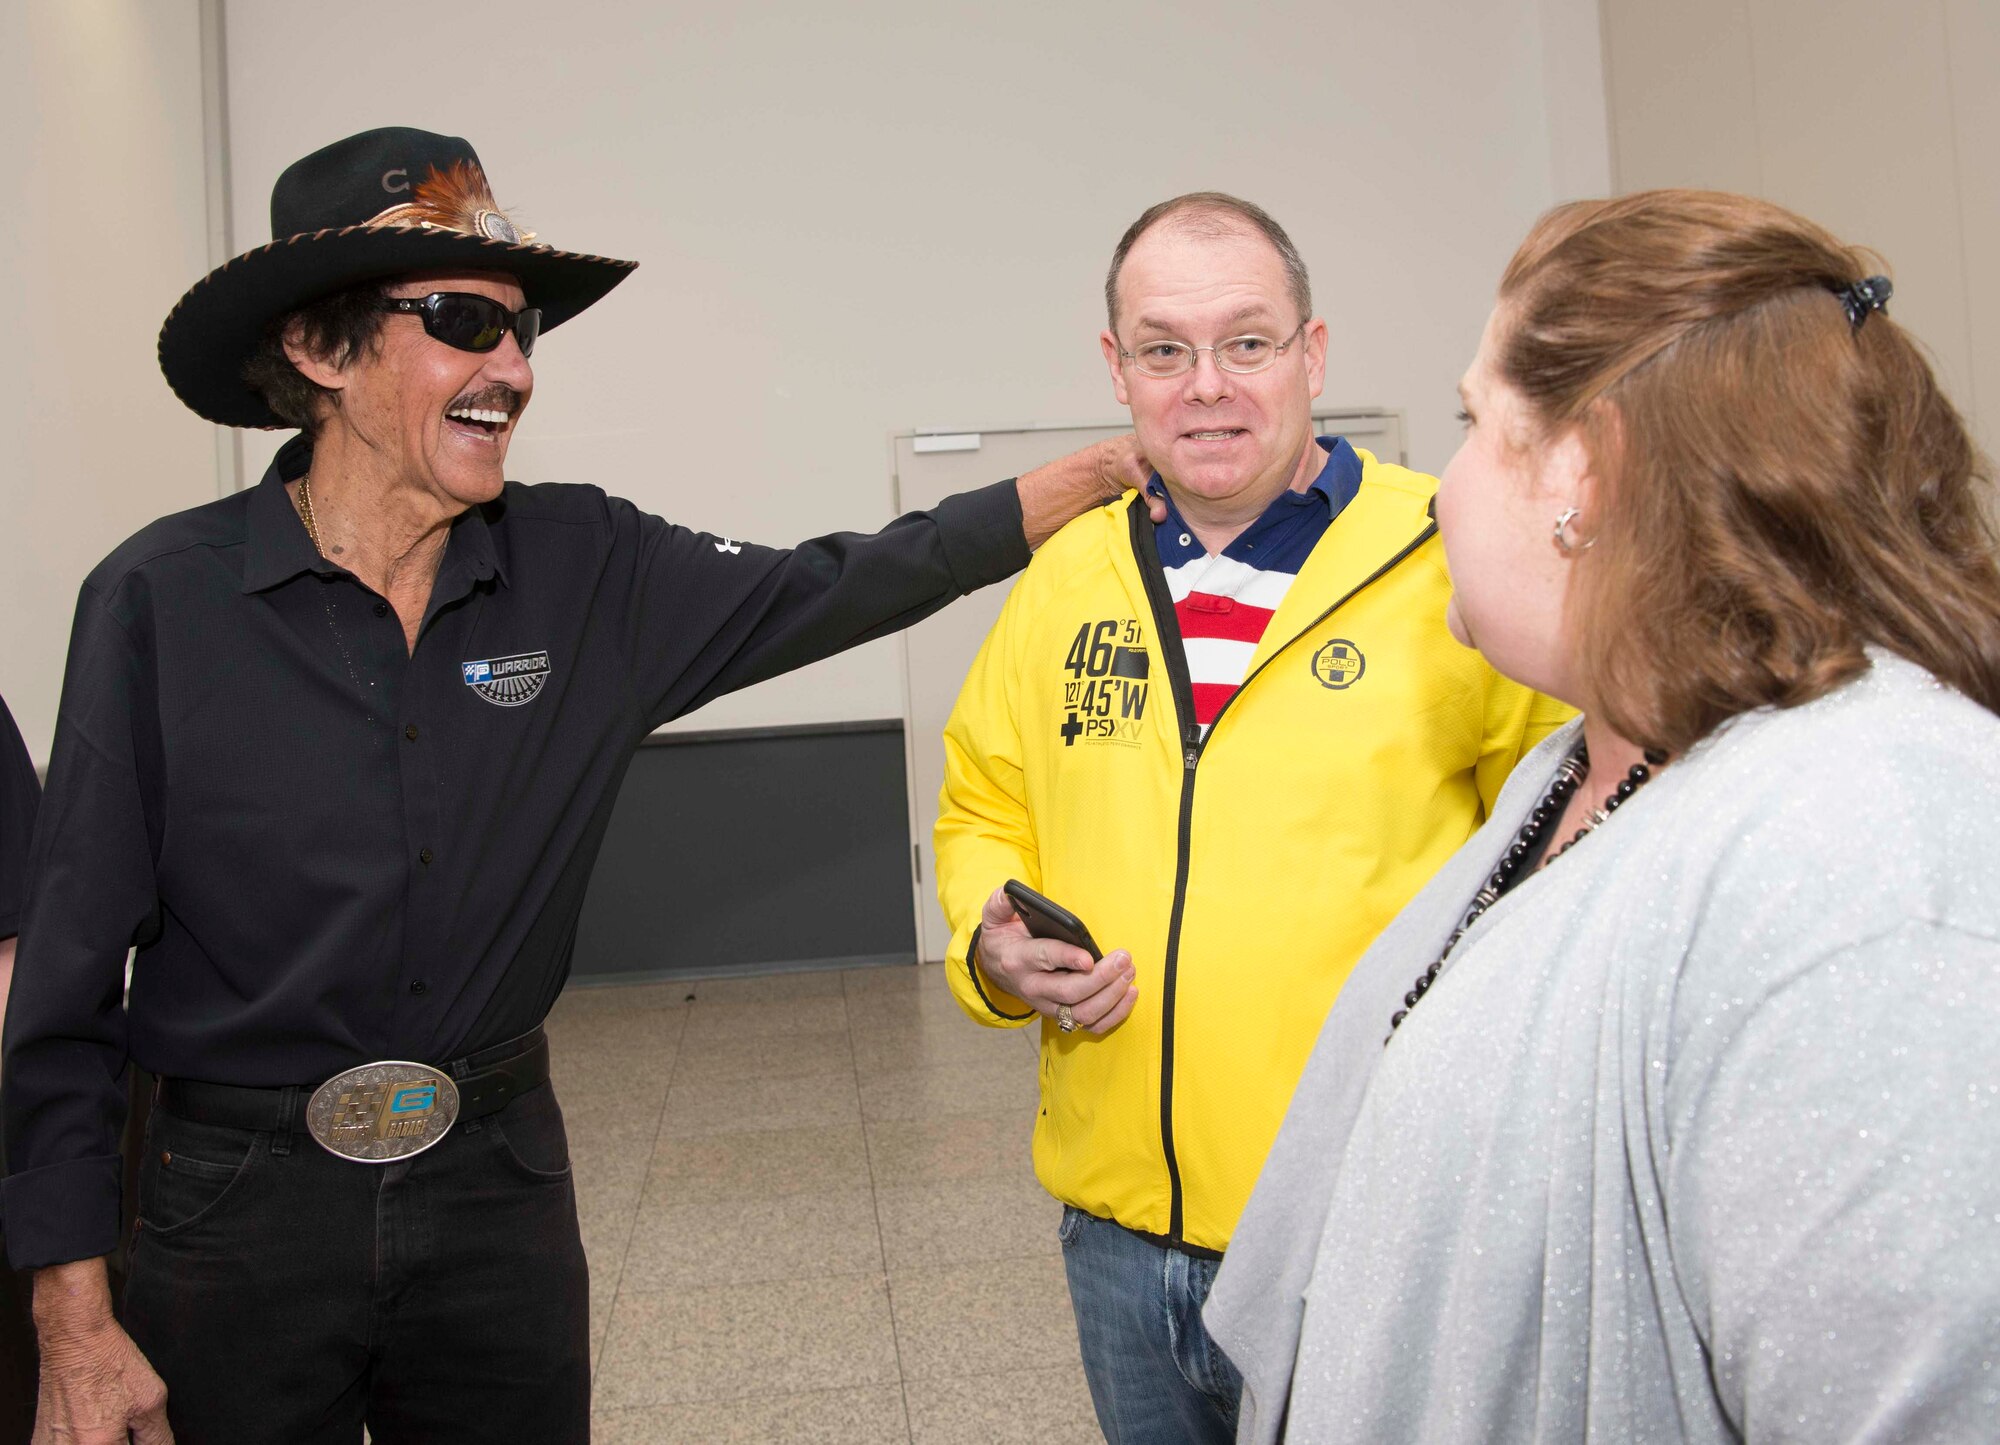 Richard Petty, left, Nascar legend, meets Brig. Gen. Richard G. Moore Jr., middle, 86th Airlift Wing commander, and Moore’s spouse, Kristin, on Ramstein Air Base, Germany, Jan. 27, 2018. The 86th Force Support Squadron, United States Air Force Recruiting Europe, the Kaiserslautern Military Community Center, and Military Auto Source brought Petty to Ramstein to participate in Air Force recruiting and help raise money for Paralyzed Vererans of America. (U.S. Air Force photo by Senior Airman Elizabeth Baker)